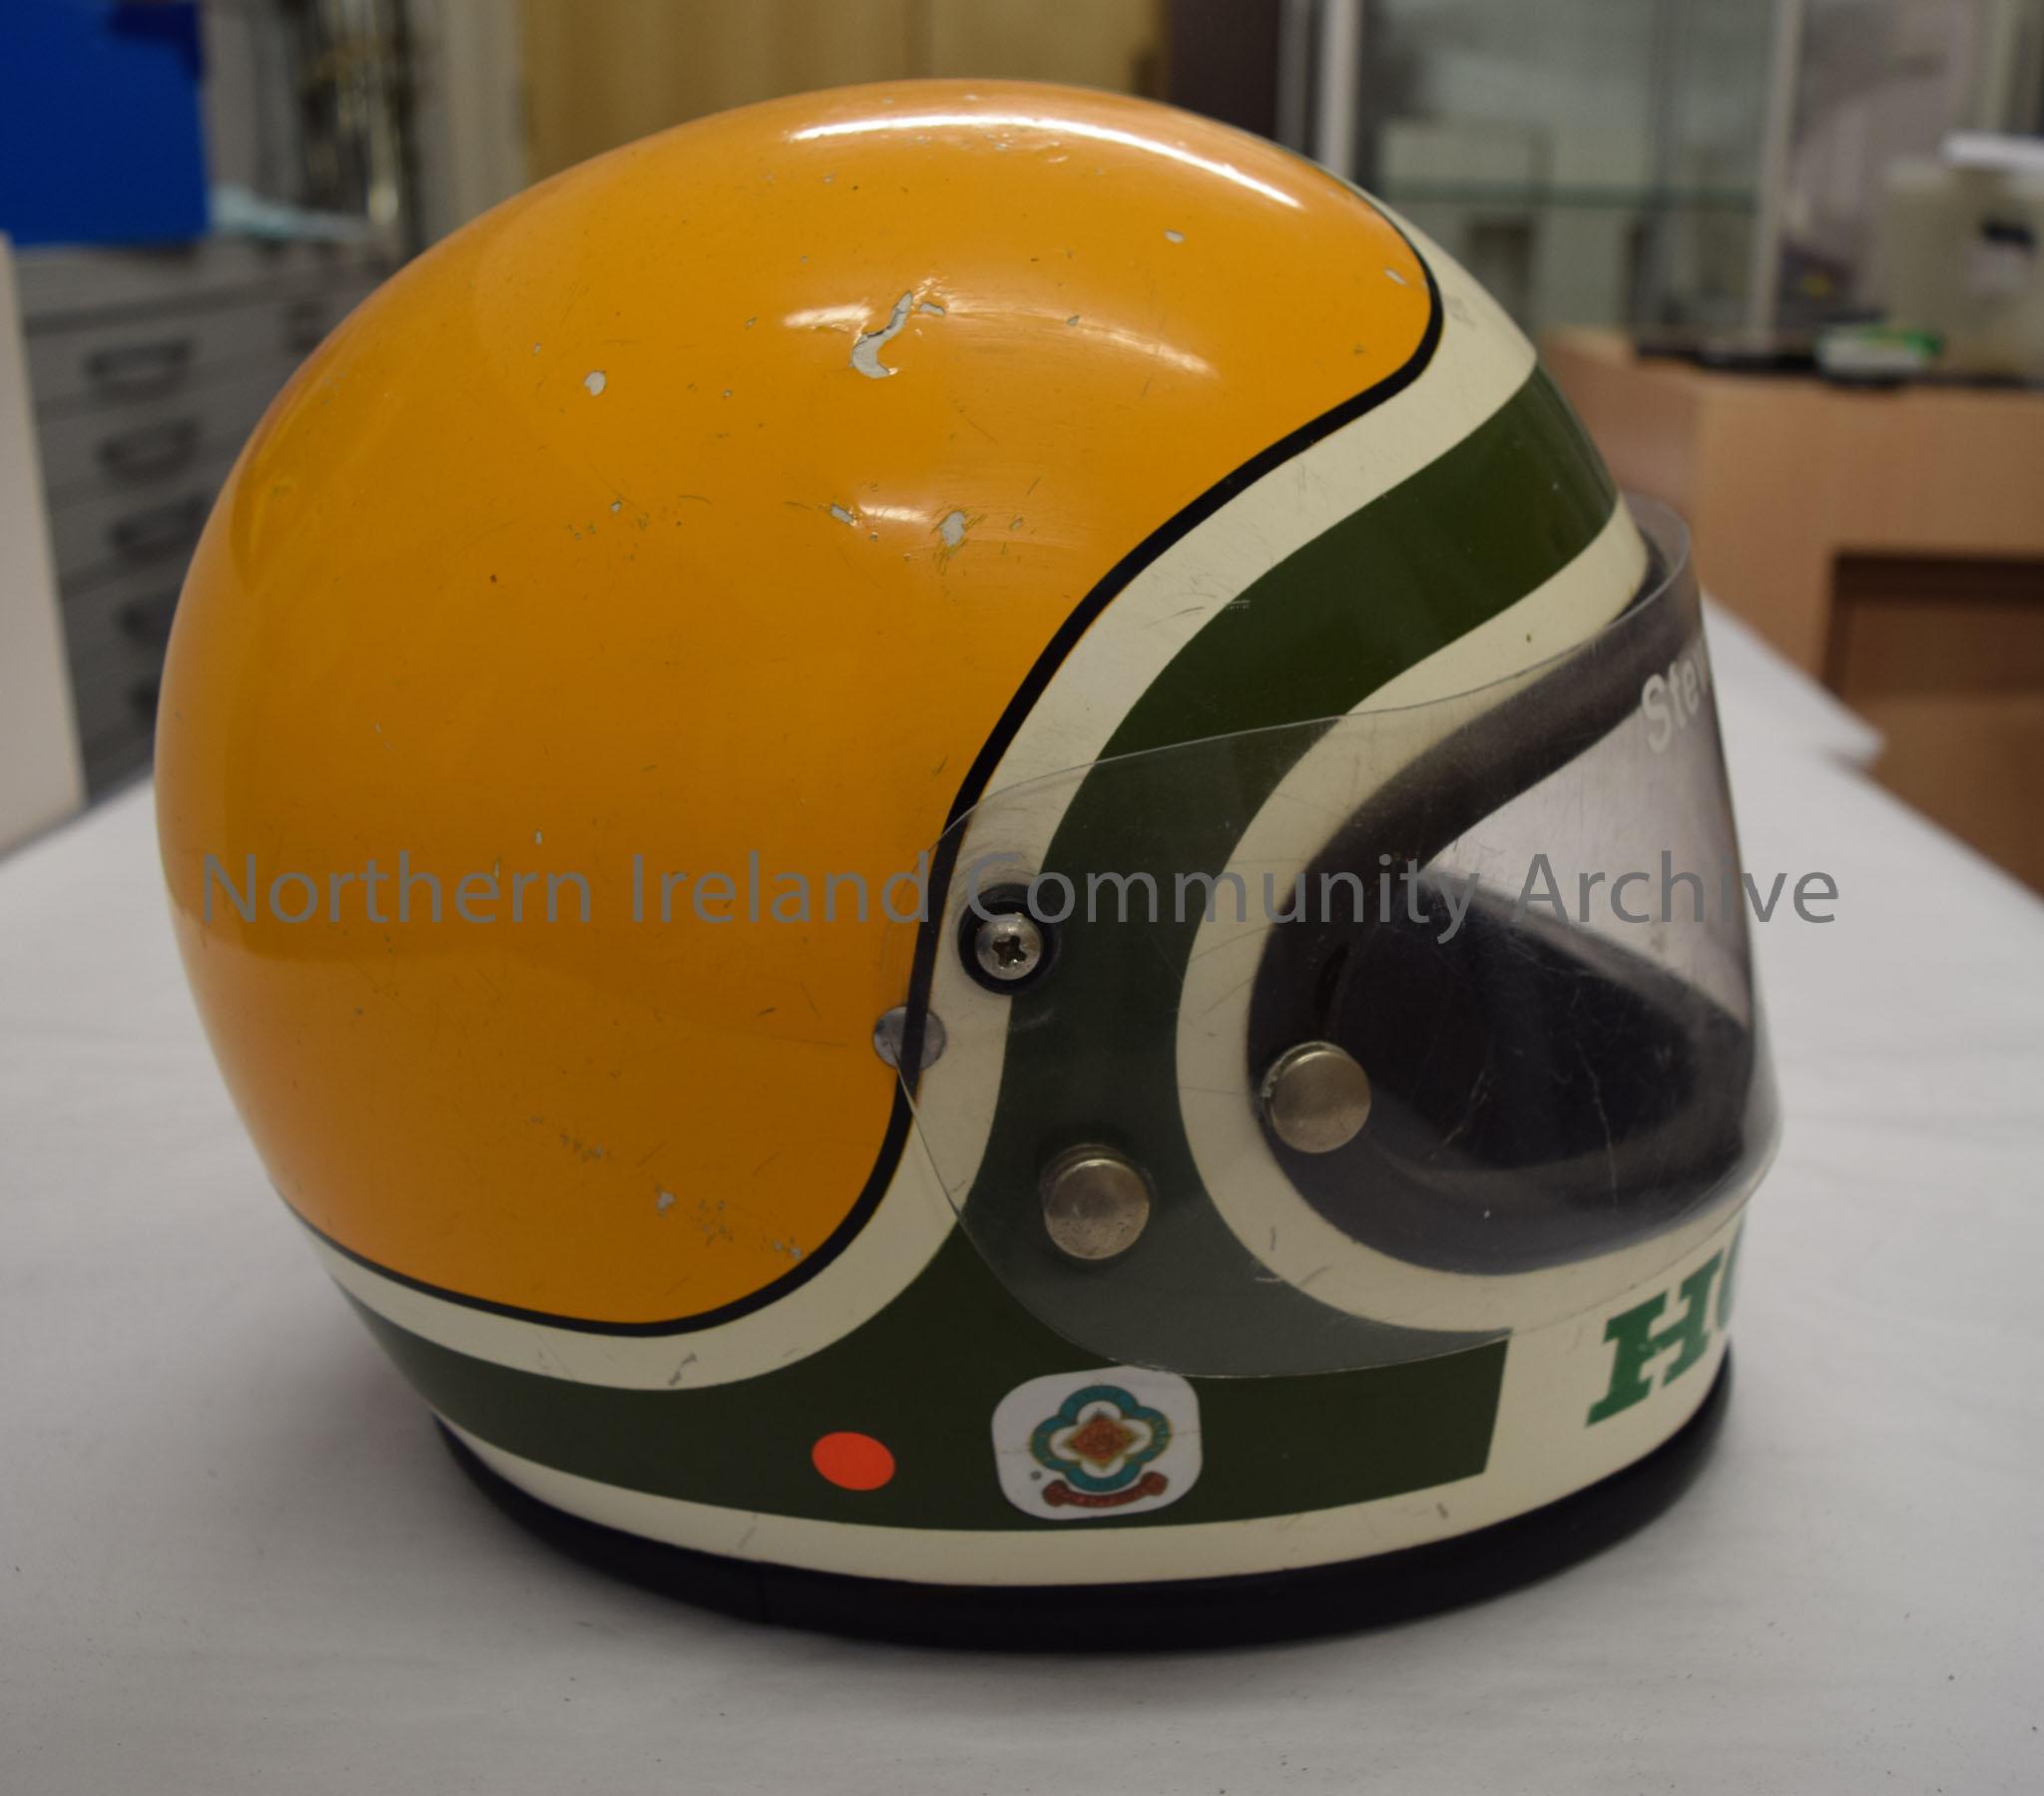 Honda motorcycle helmet belonging to Stewart Anderson. White helmet with green stripe and yellow back and sides. – 2016.47 (5)